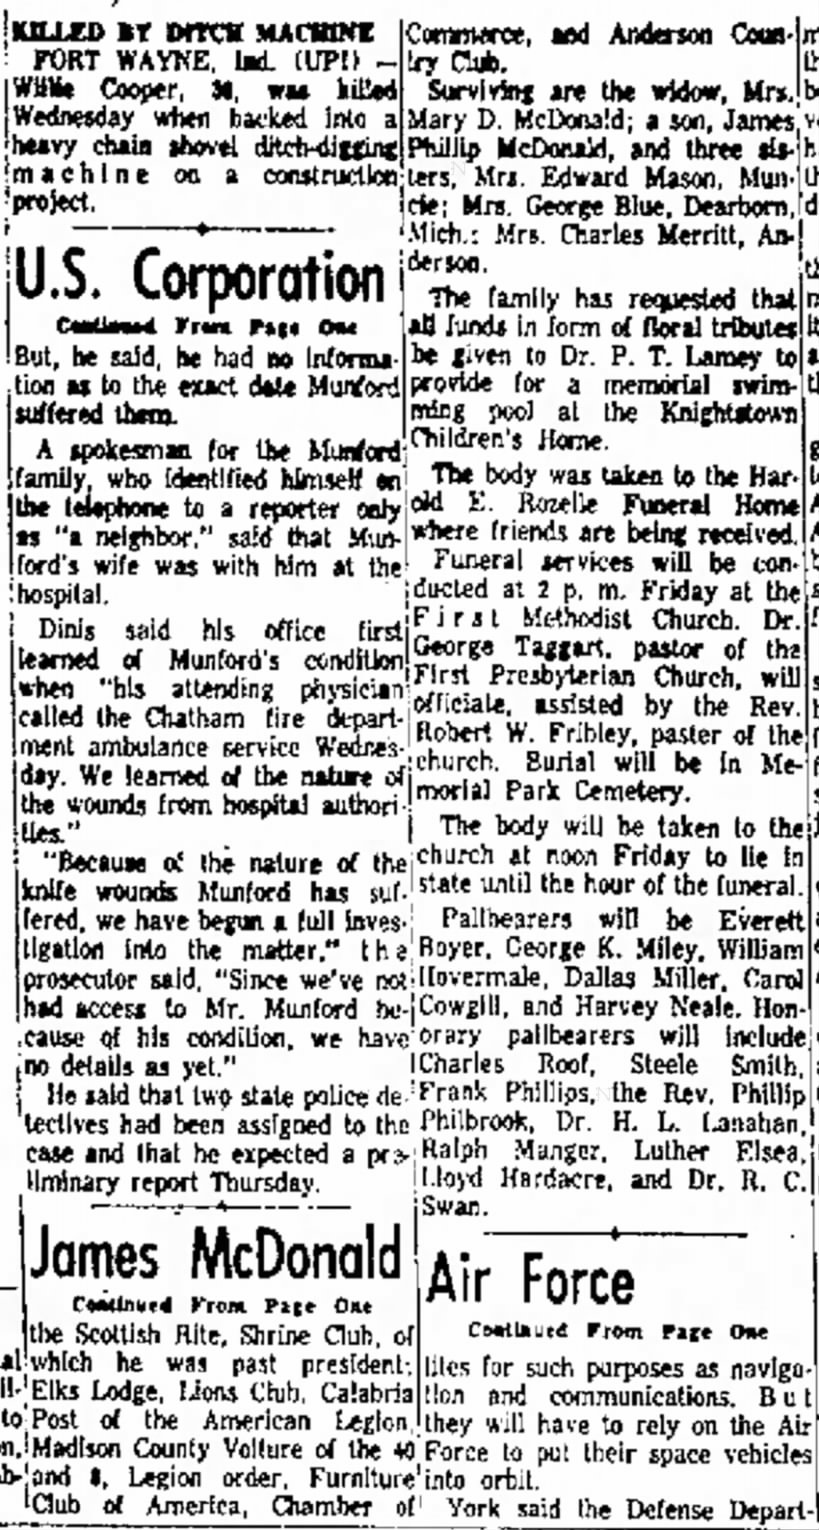 James Henry McDONALD, Anderson Herald, 24 Sep 1959, Thu, Page#2.